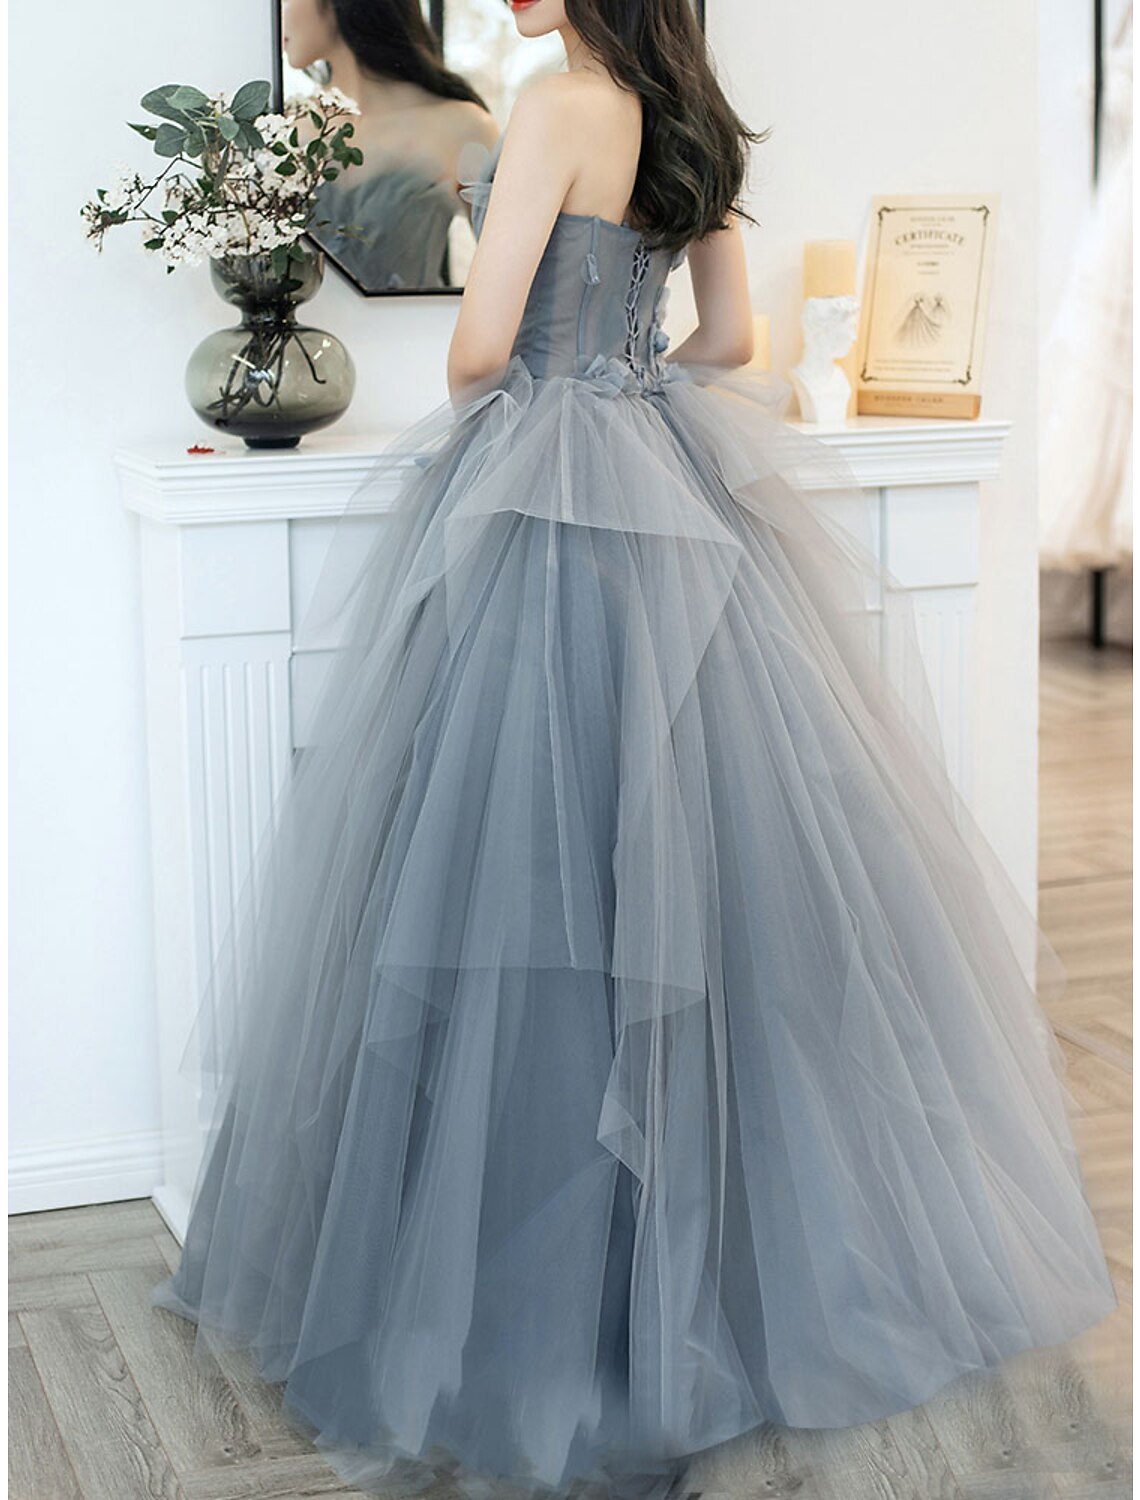 A-Line Prom Dresses Cute Dress Engagement Prom Sweep / Brush Train Sleeveless Strapless Tulle with Appliques Pure Color